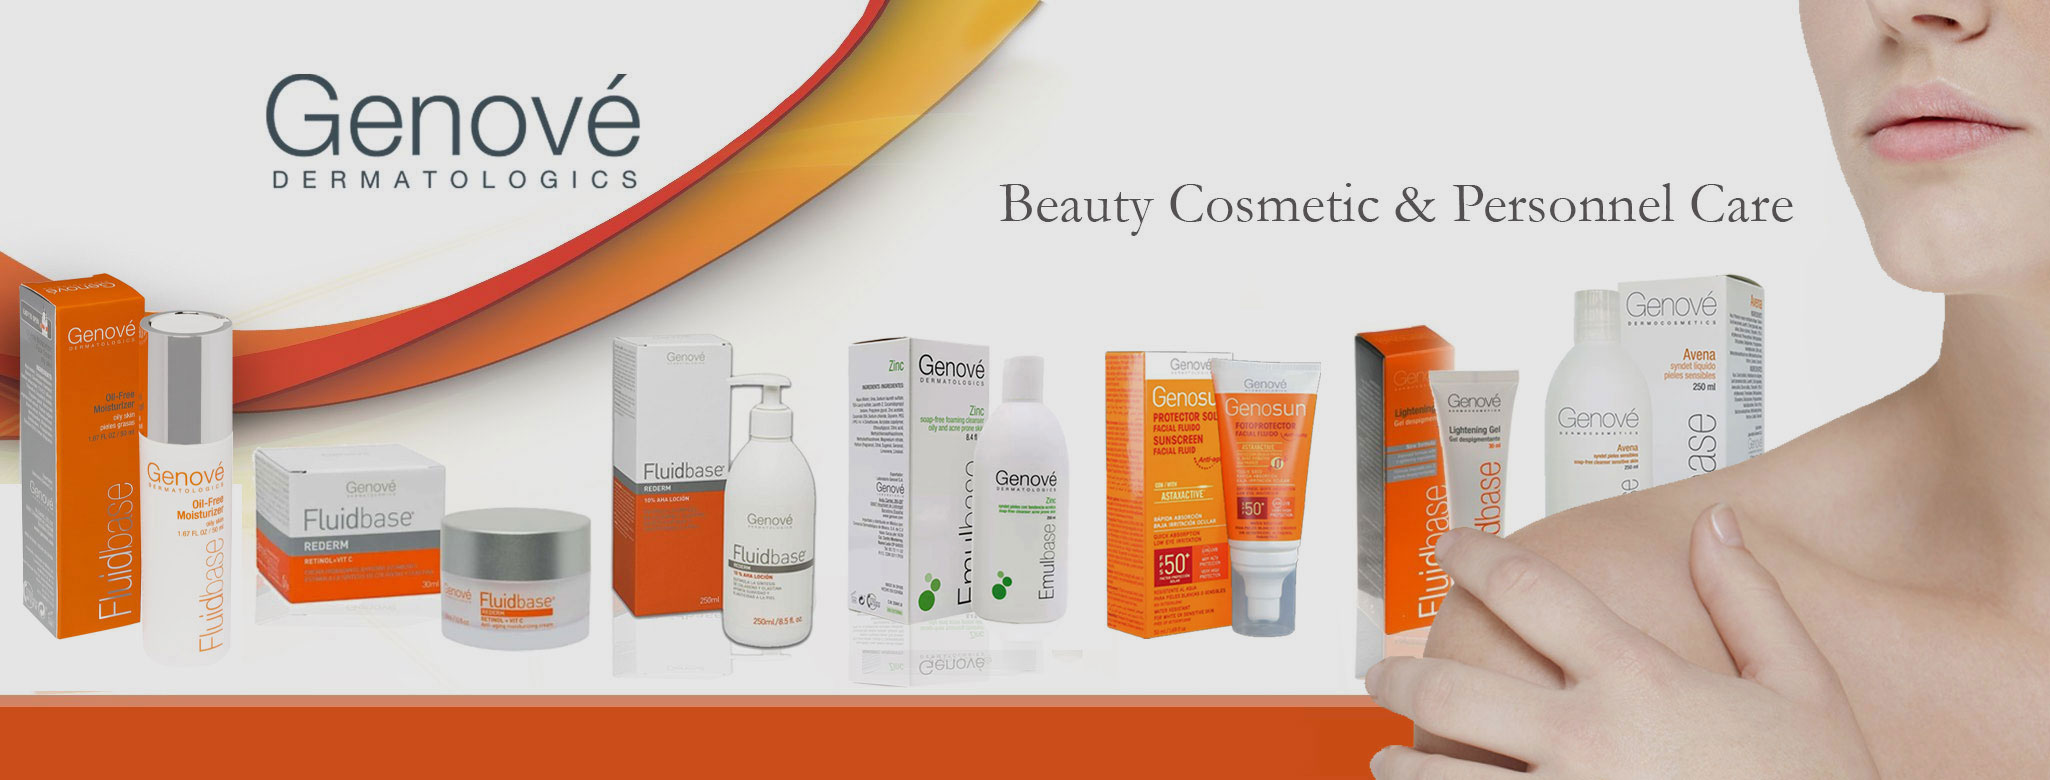 genove-skincare-products